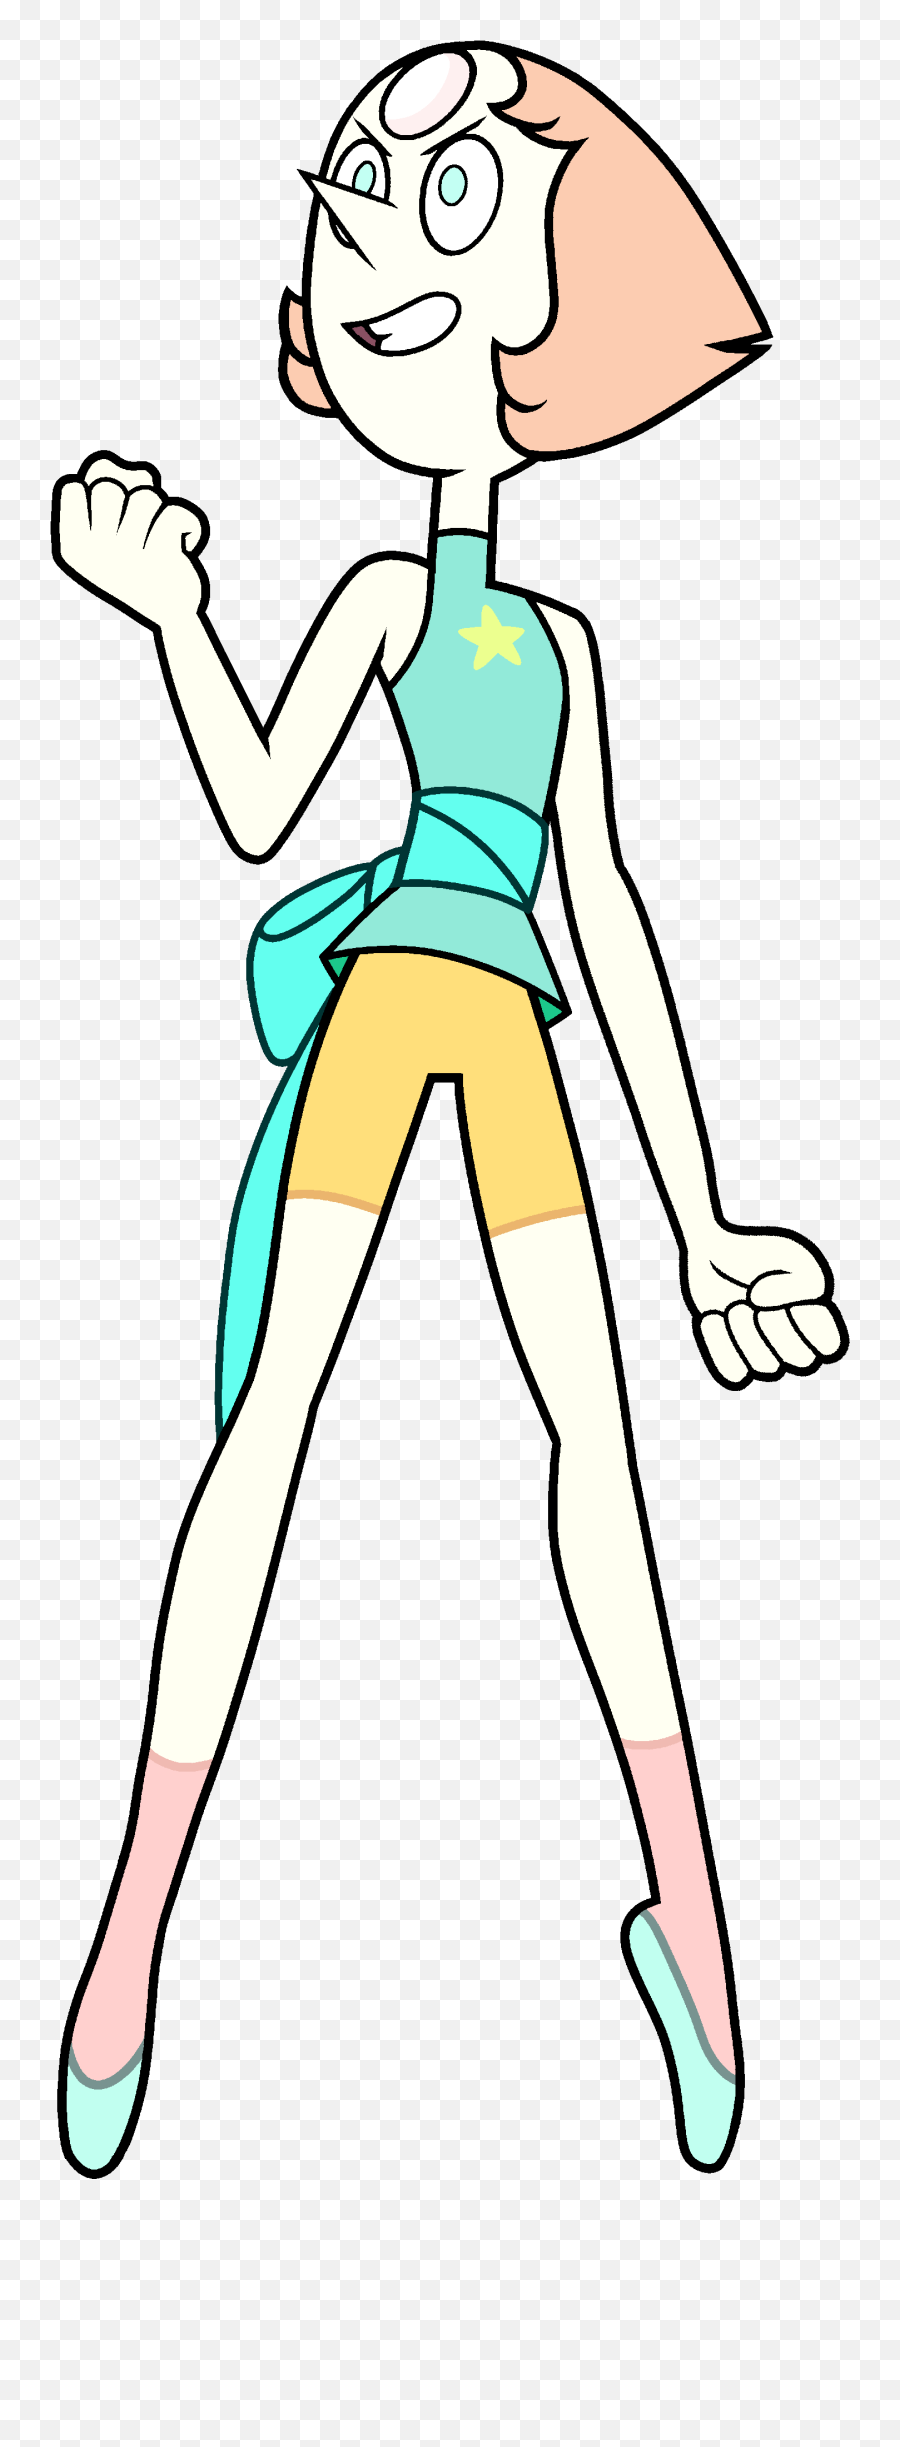 Download Free Png Image Result For Pearl Steven Universe - Pearl Steven Universe Character,Universe Png